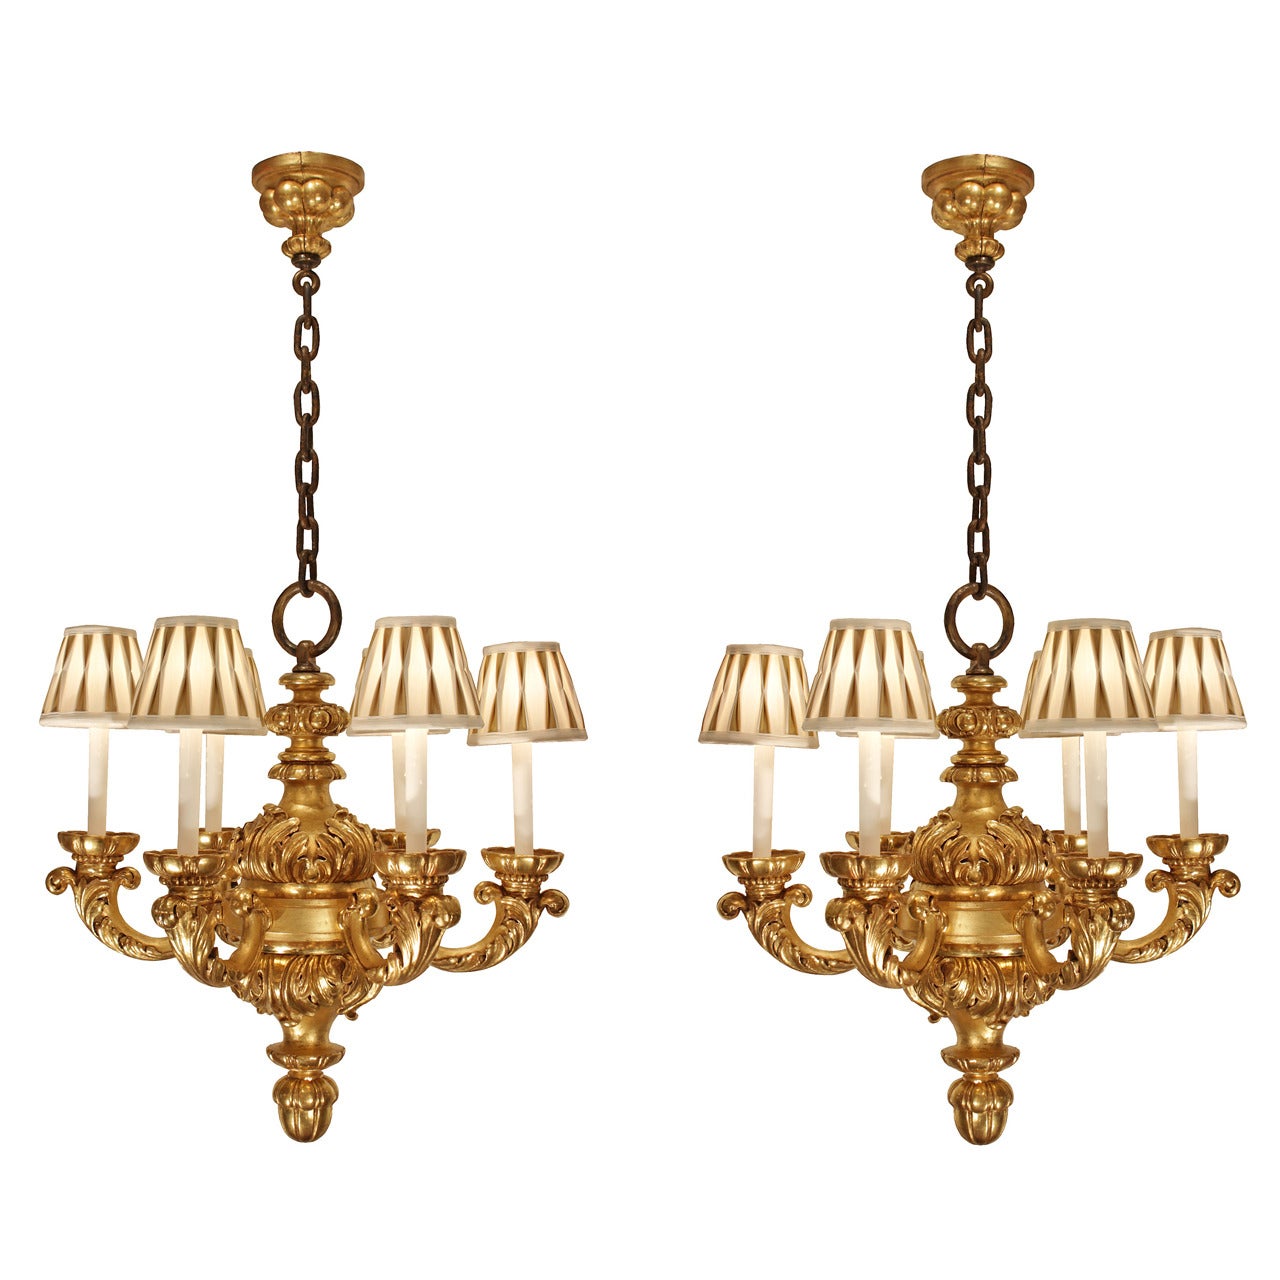 Pair of 19th Century Italian Inspired Louis XV Style Giltwood Chandeliers